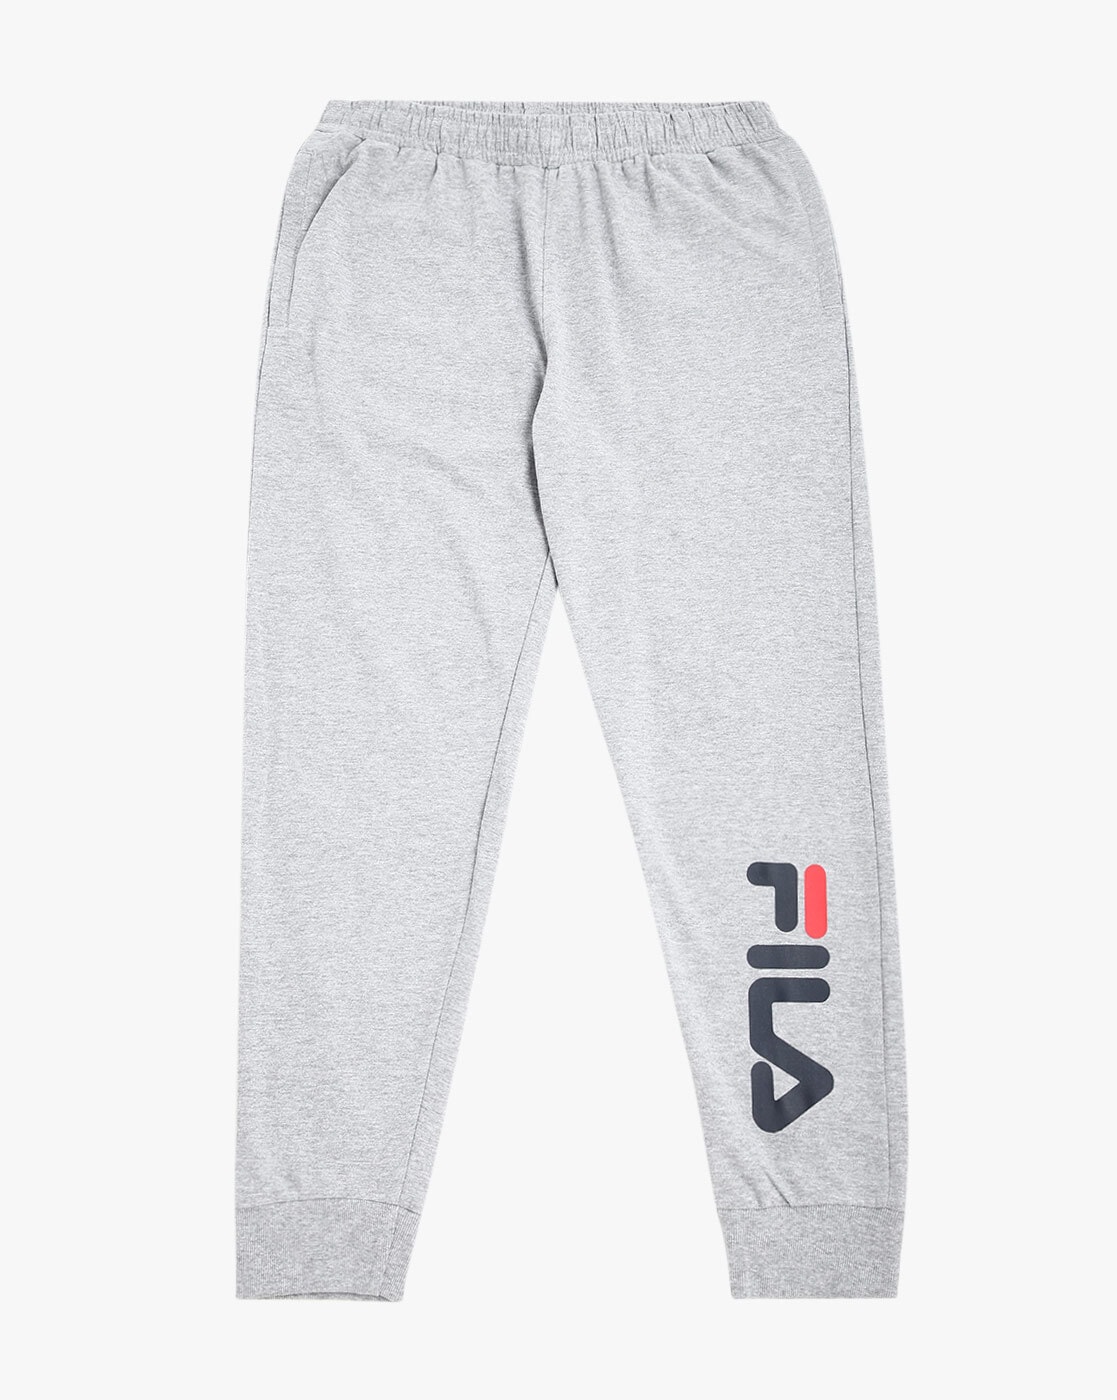 Buy FILA CASUAL Grey Polyester Mens Track Pants  Shoppers Stop